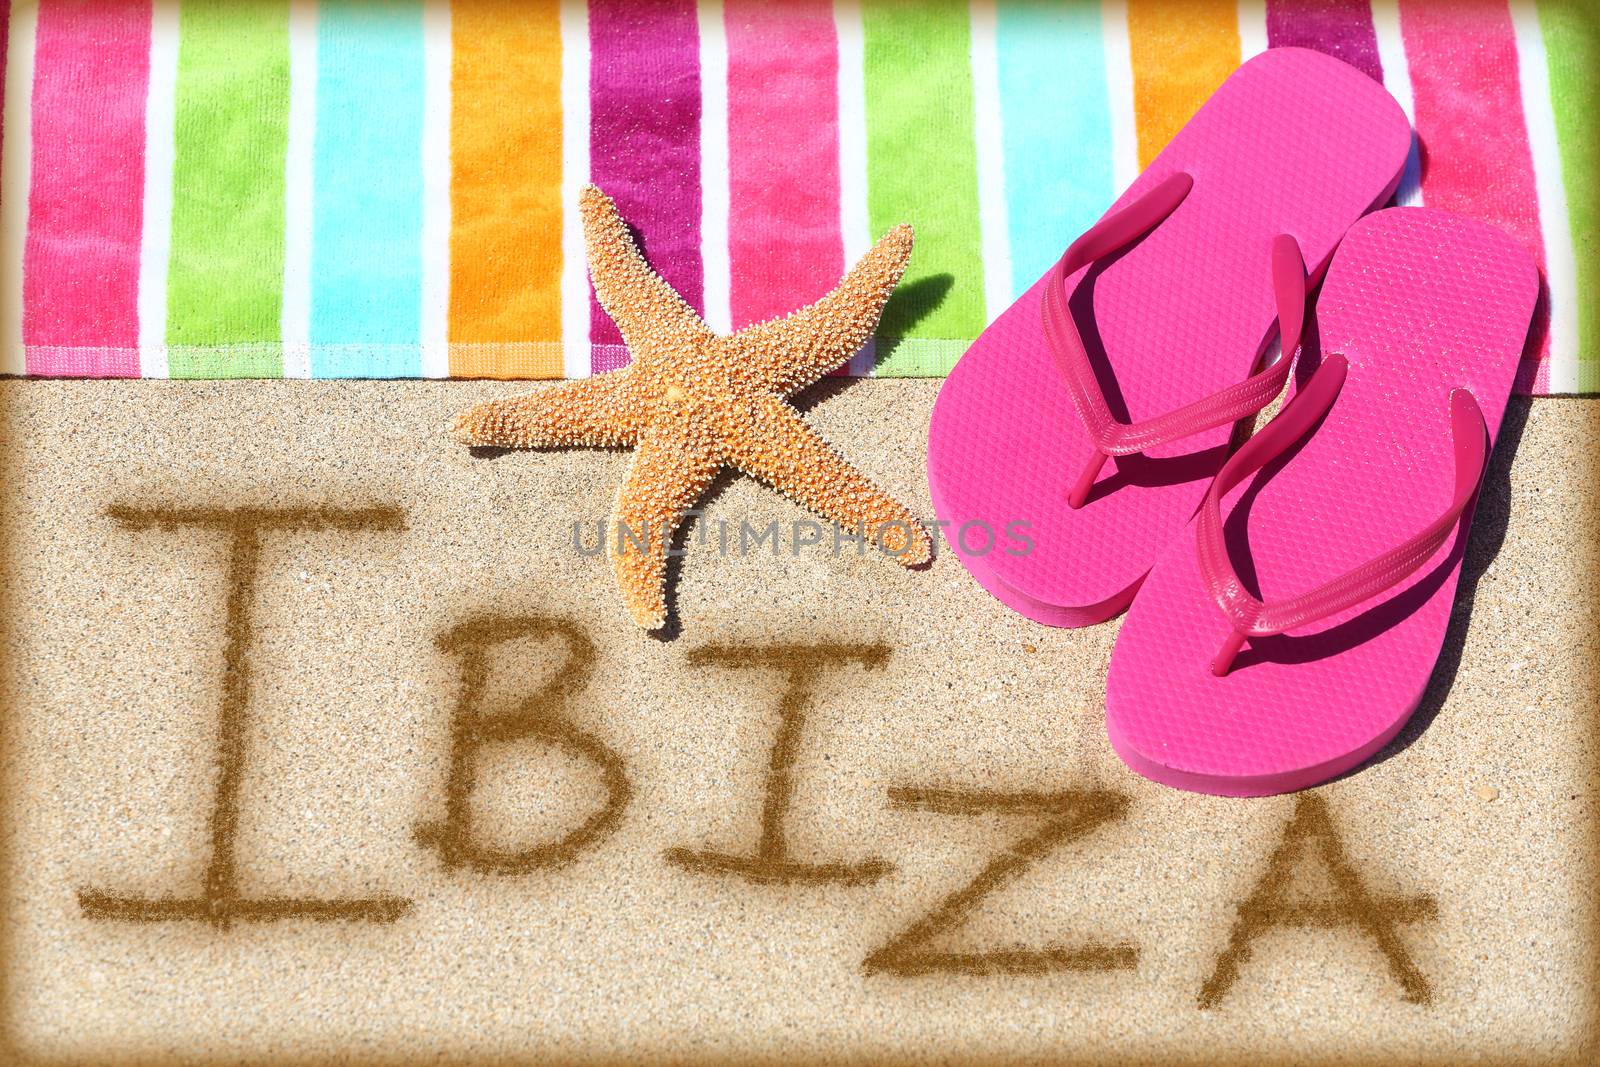 Ibiza beach travel concept background. IBIZA written in sand with water next to beach towel, summer sandals and starfish. Summer and sun vacation holidays on Balearic Islands, Spain.